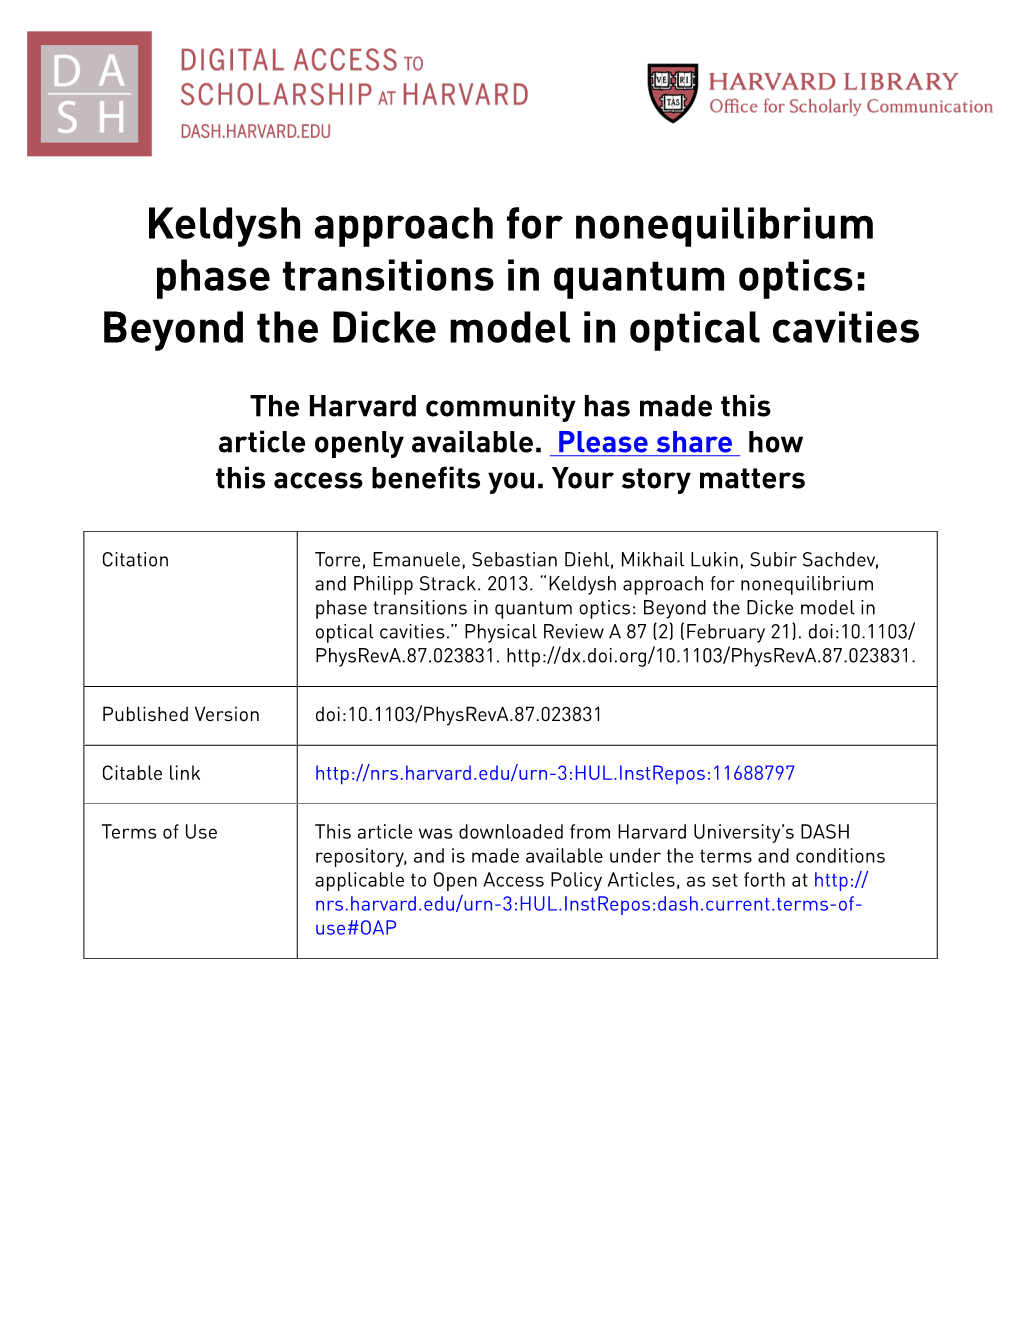 Keldysh Approach for Nonequilibrium Phase Transitions in Quantum Optics: Beyond the Dicke Model in Optical Cavities